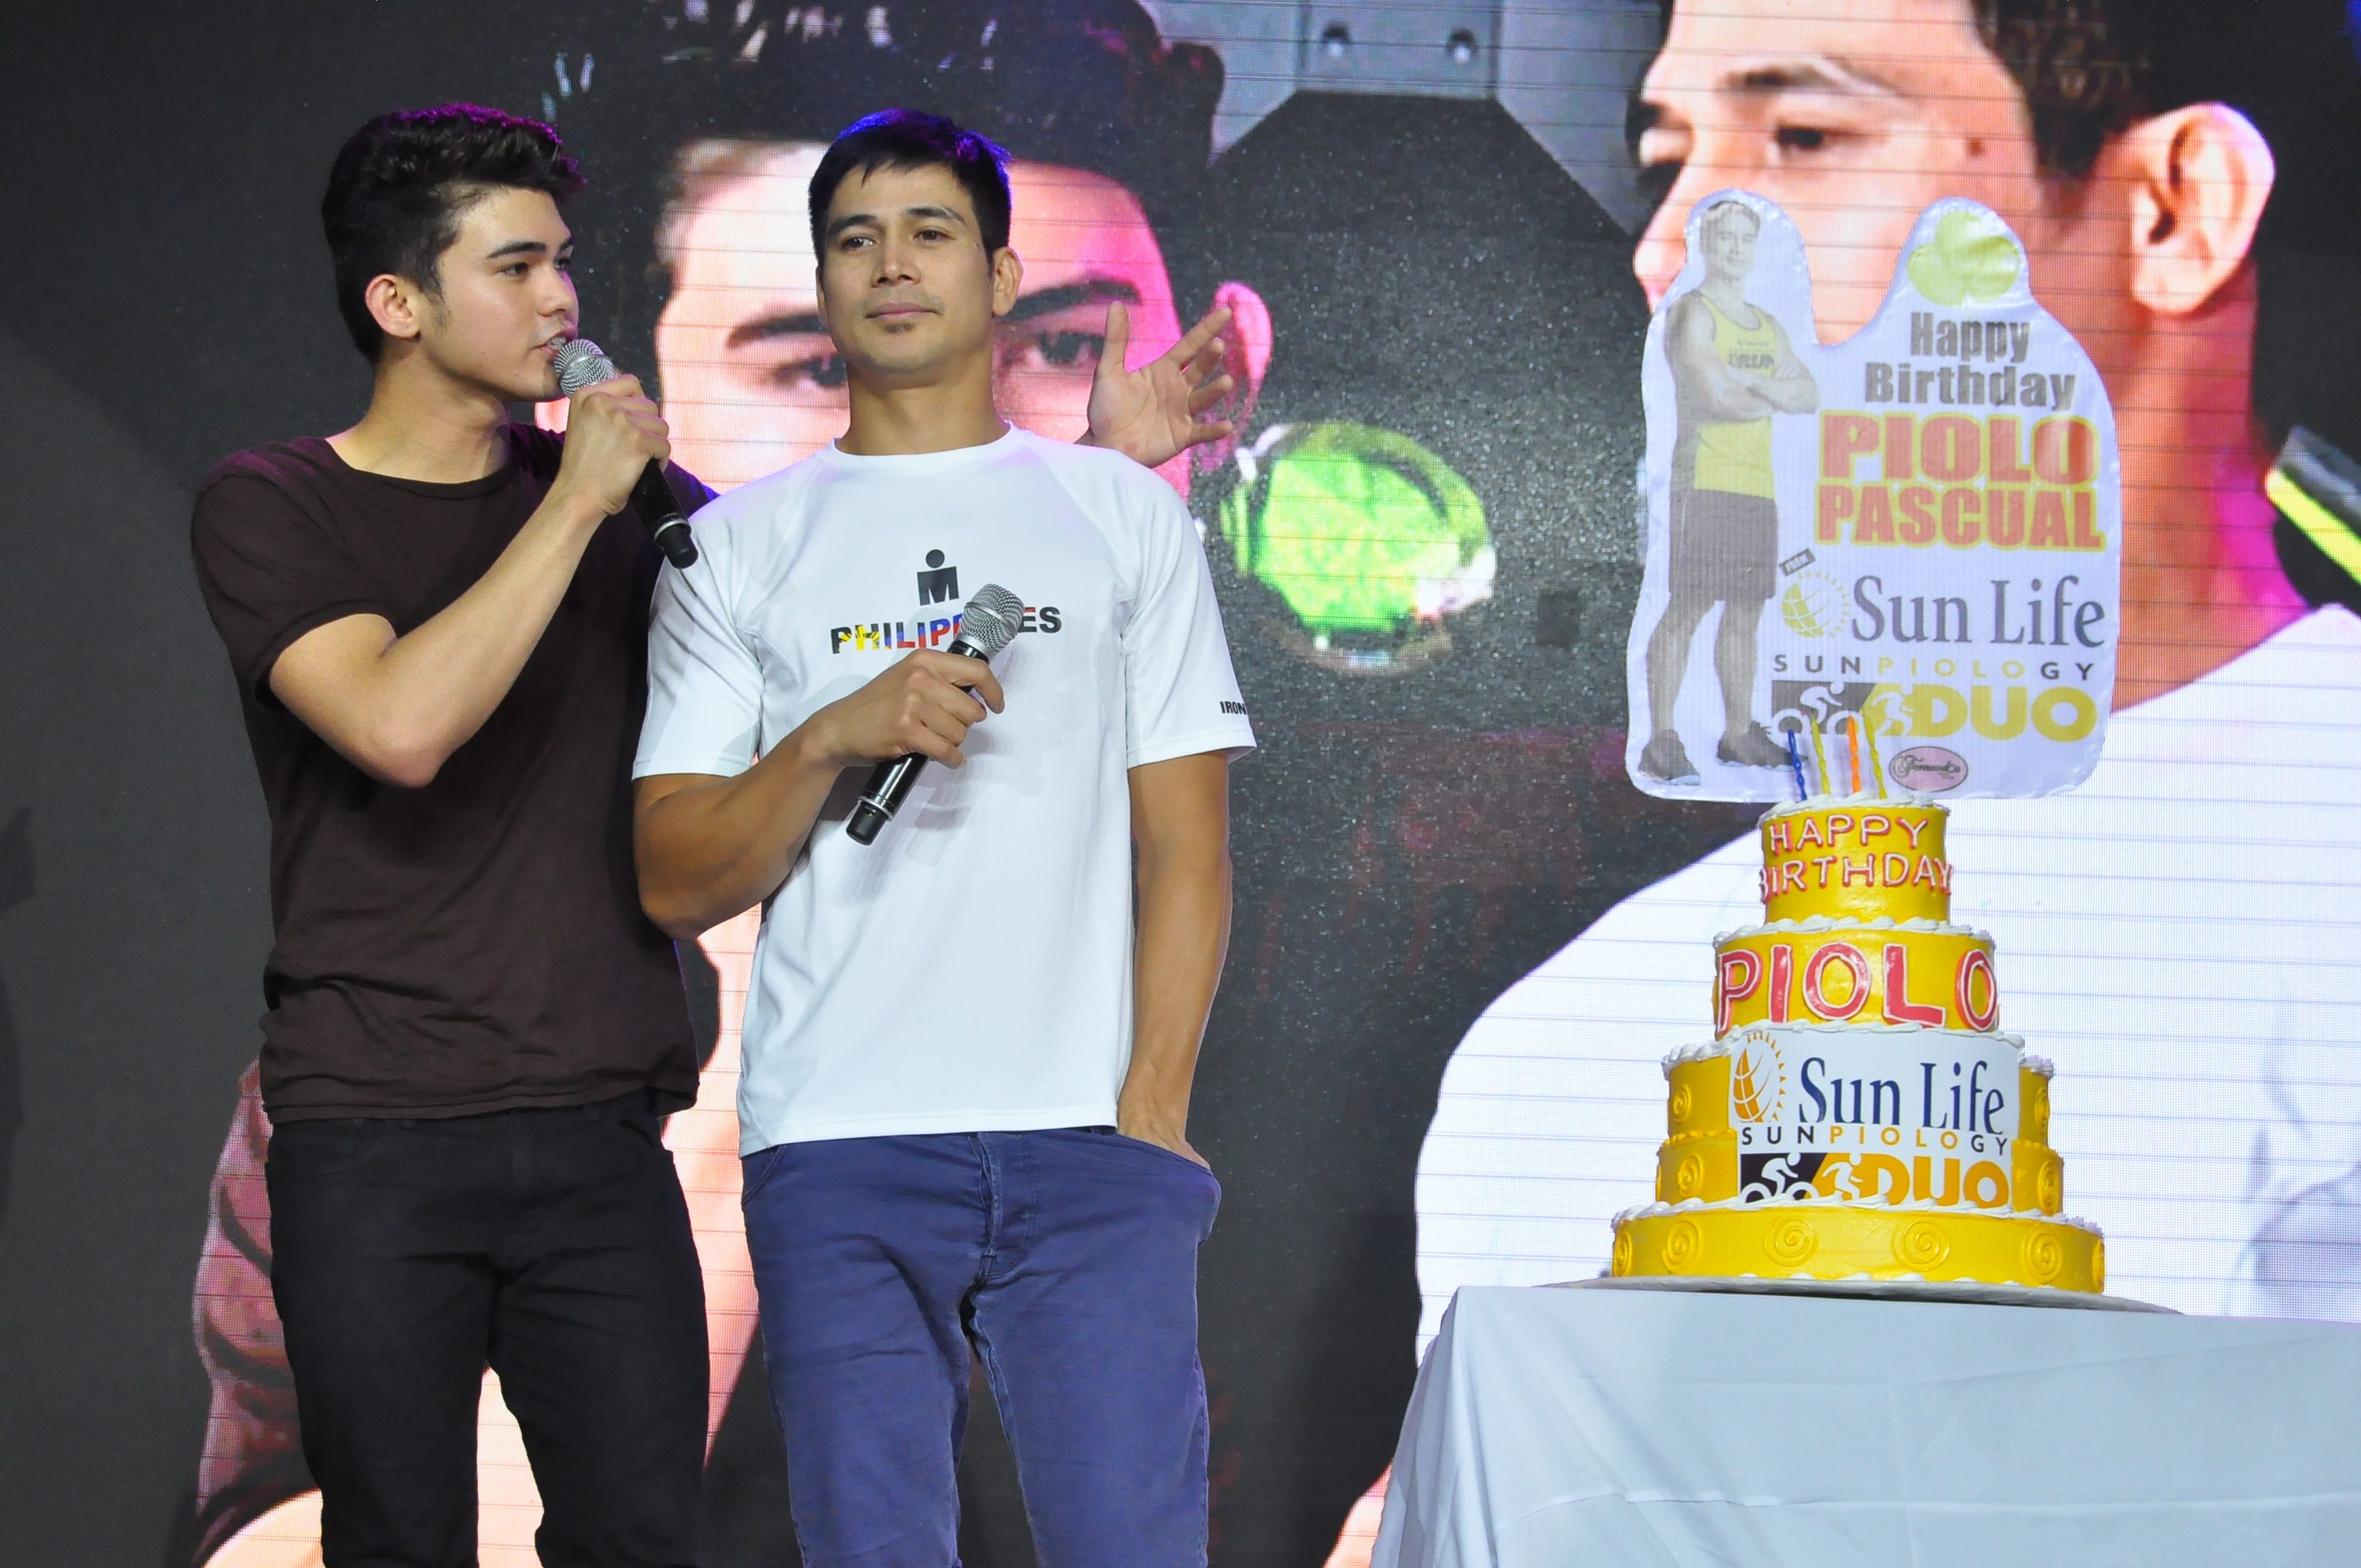 BIRTHDAY SURPRISE. Inigo (Left) and Piolo Pascual (Right) treated fans in celebration of the latter's recent birthday. Photo from Sun Life 